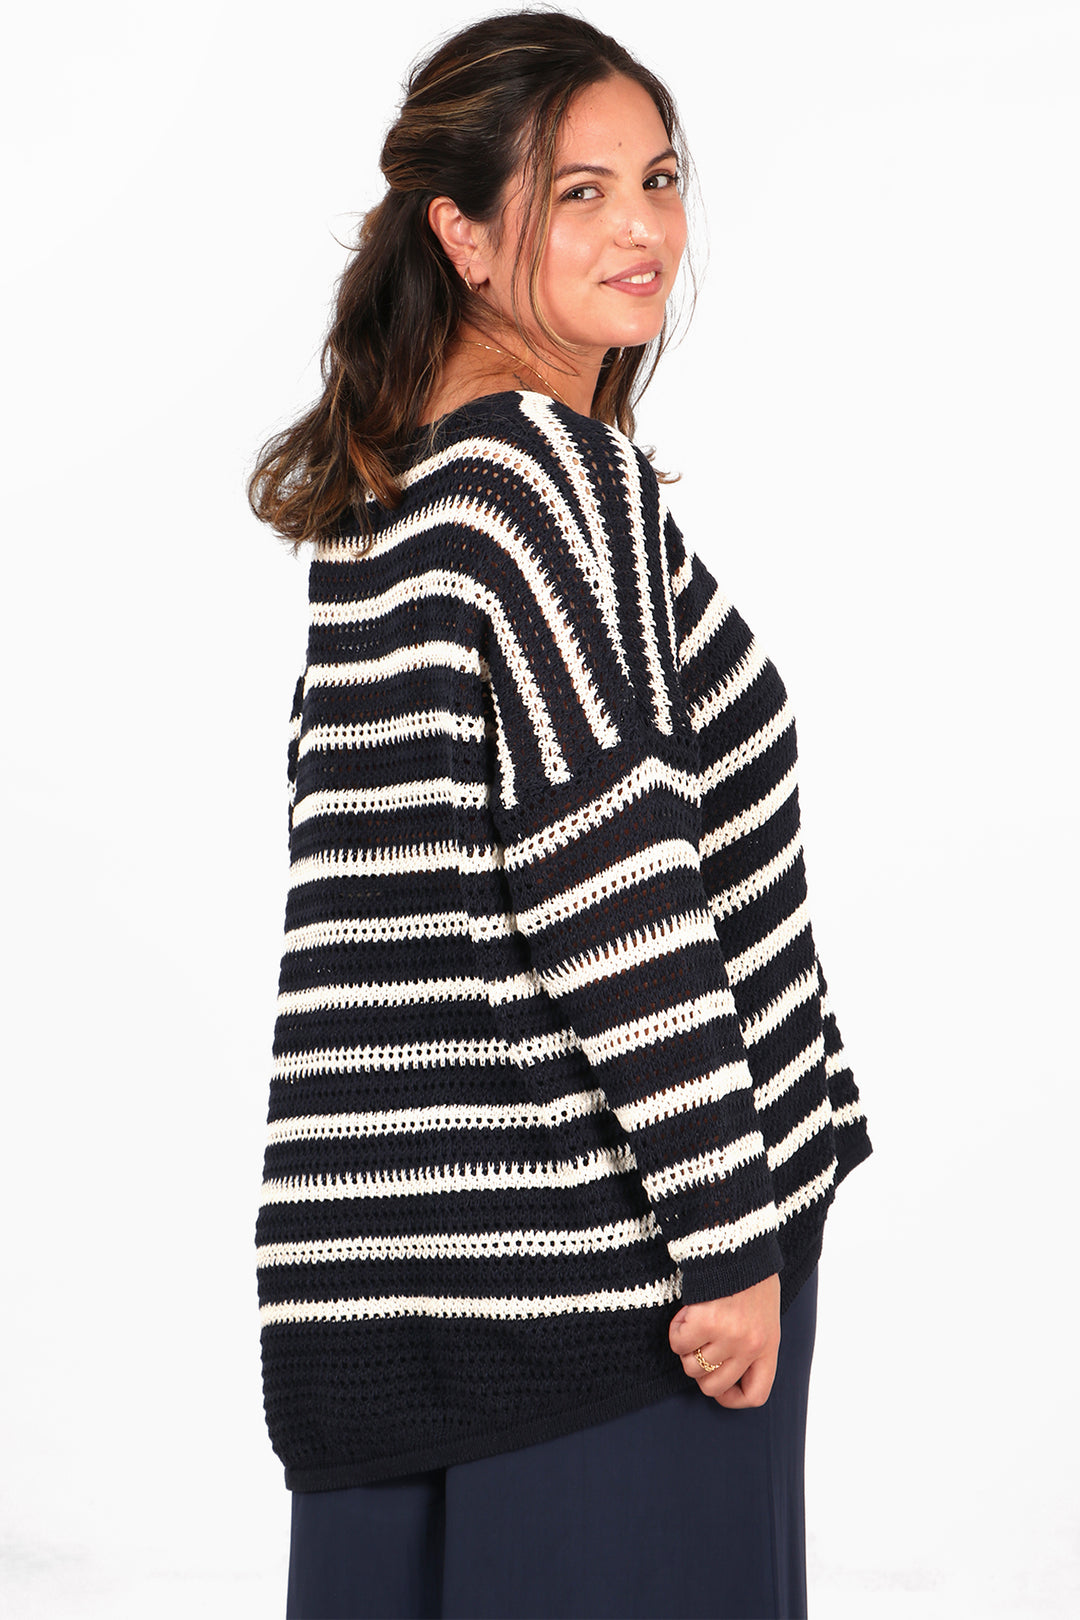 model showing the back of the navy blue striped cotton jumper